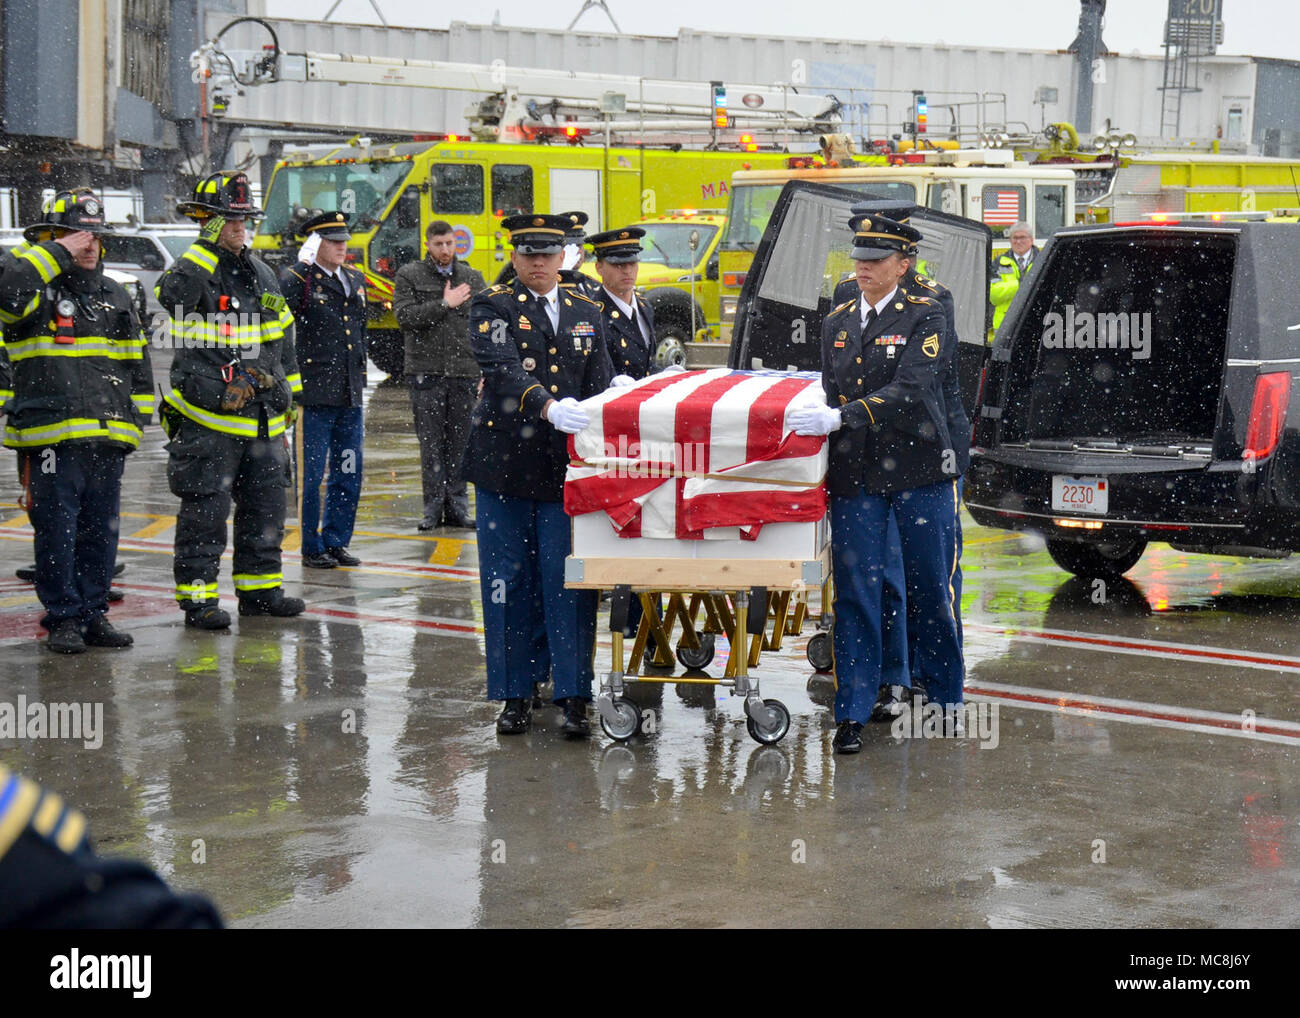 BOSTON (Apr. 2, 2018) The Military Funeral Honors Team of the Massachusetts Army National Guard carries the casket of Medal of Honor Recipient Capt. Thomas J. Hudner, Jr., USN, to a plane for transport to Arlington National Cemetery for his final internment. Capt. Hudner, a naval aviator, received the Medal of Honor for his actions during the Battle of the Chosin Reservoir during the Korean War. Stock Photo